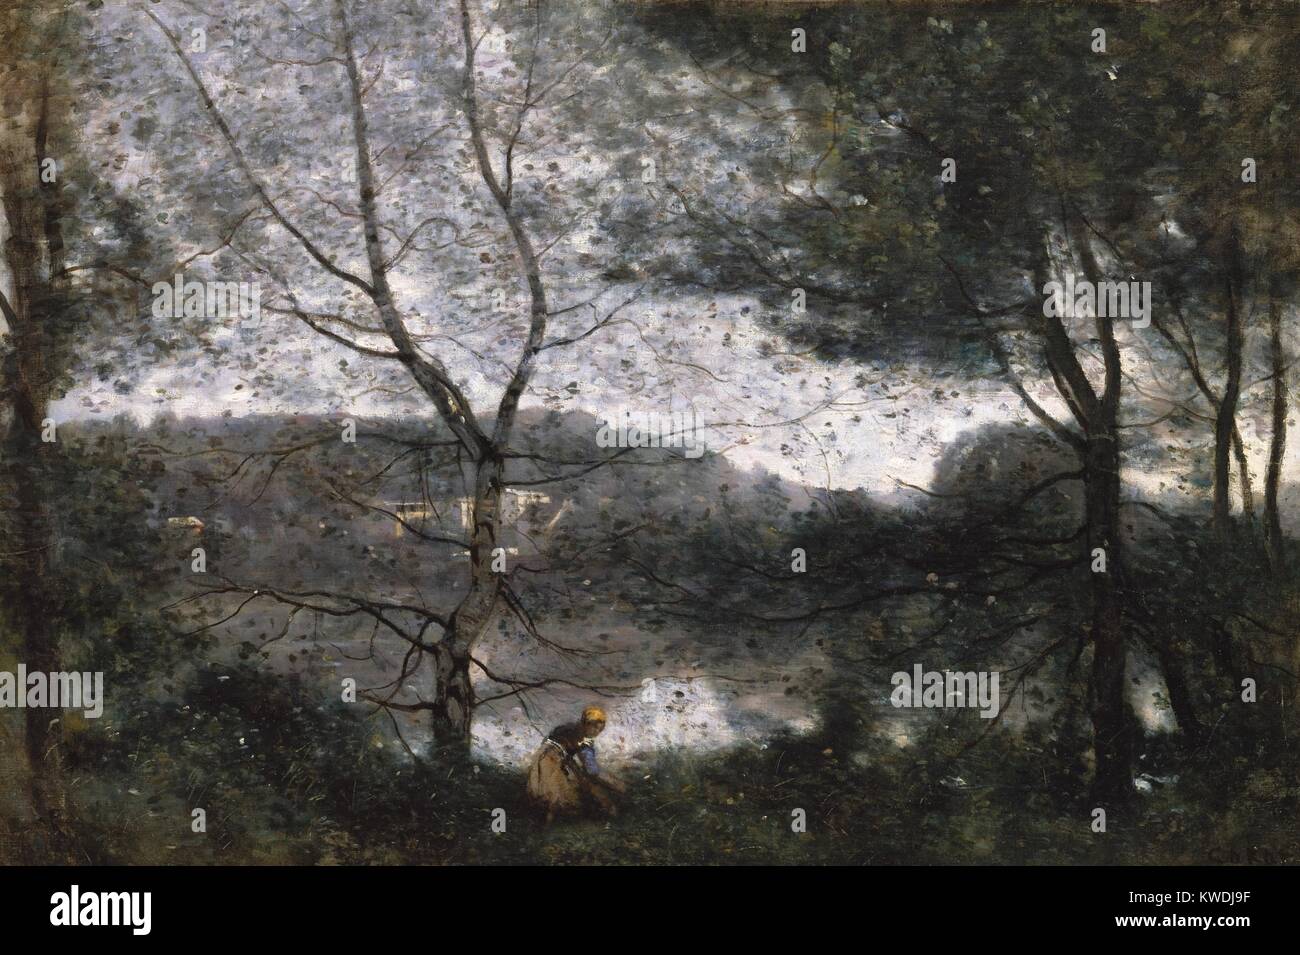 VILLE-DAVRAY, by Camille Corot, 1870, French painting, oil on canvas. This is painted on the property the artist inherited from his parents at Ville-dAvray (BSLOC_2017_9_91) Stock Photo